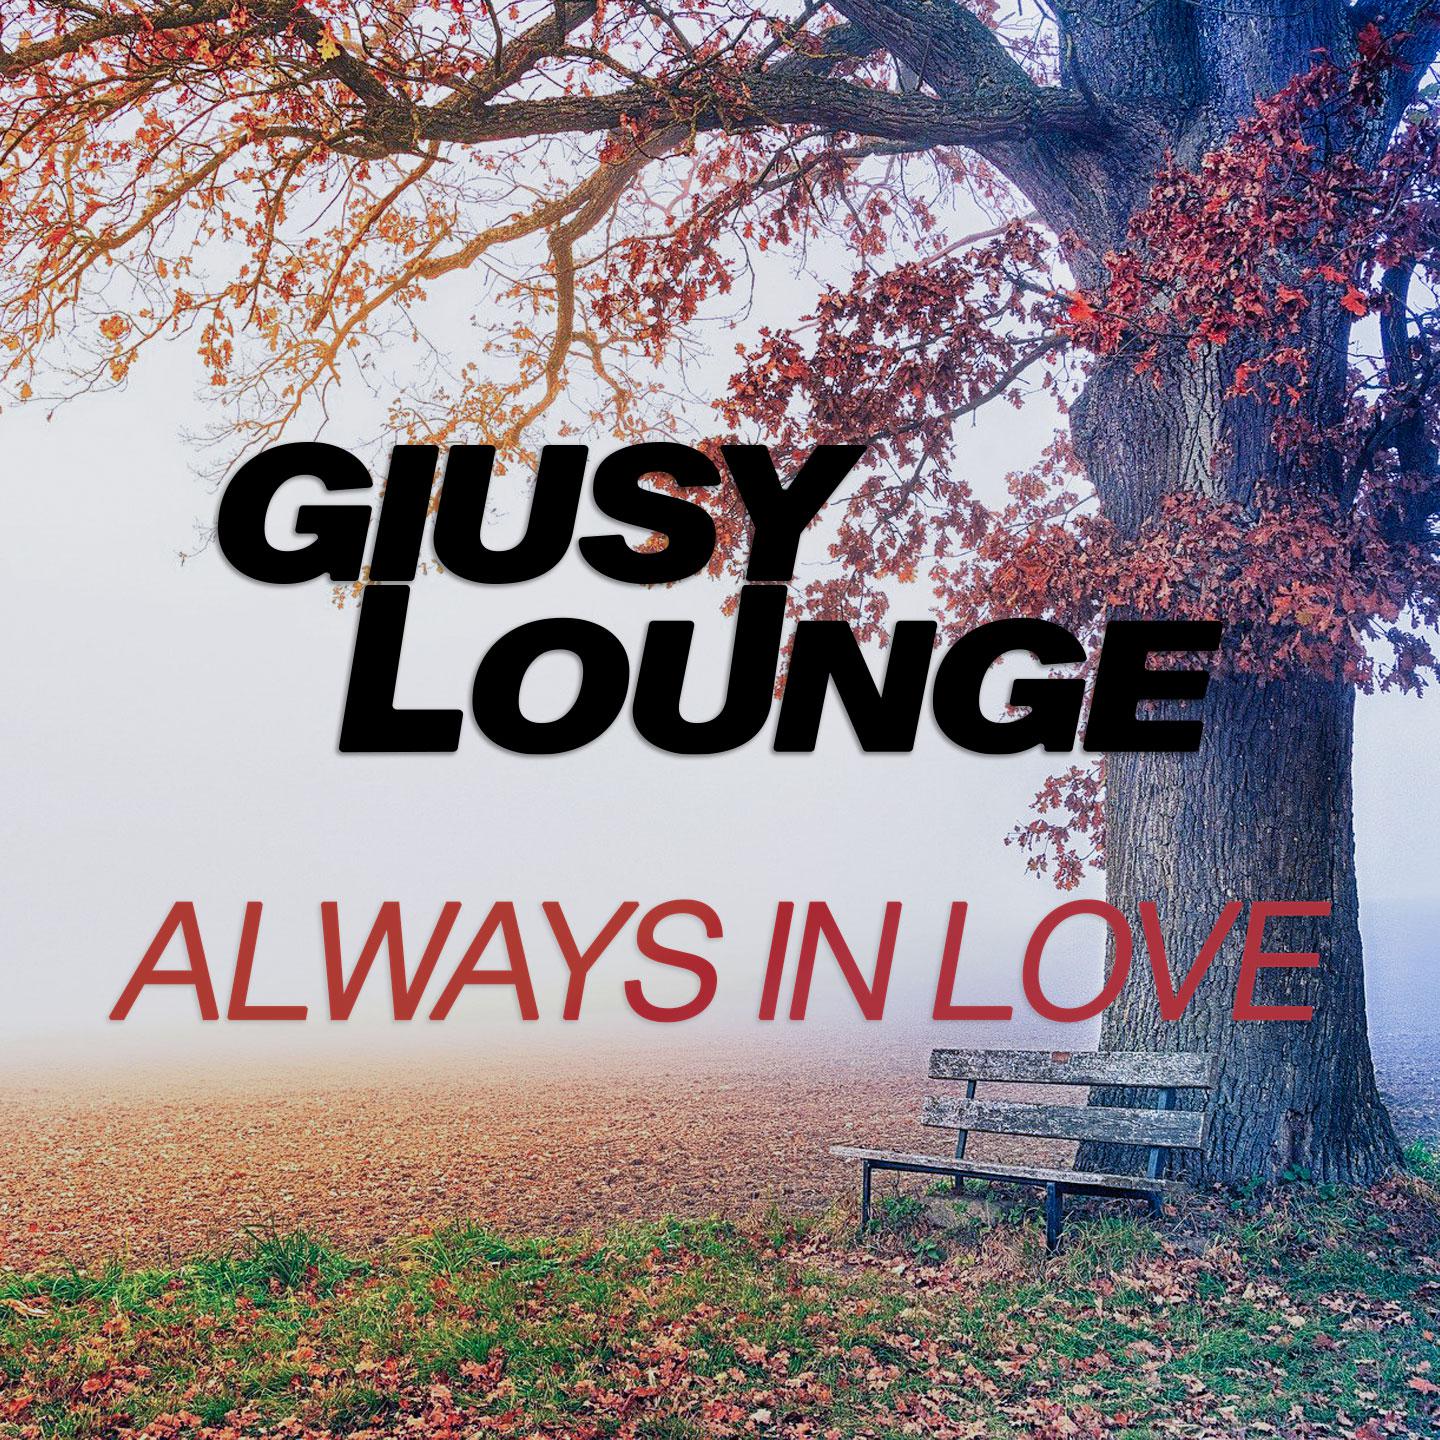 Giusy Lounge - Everything I Own